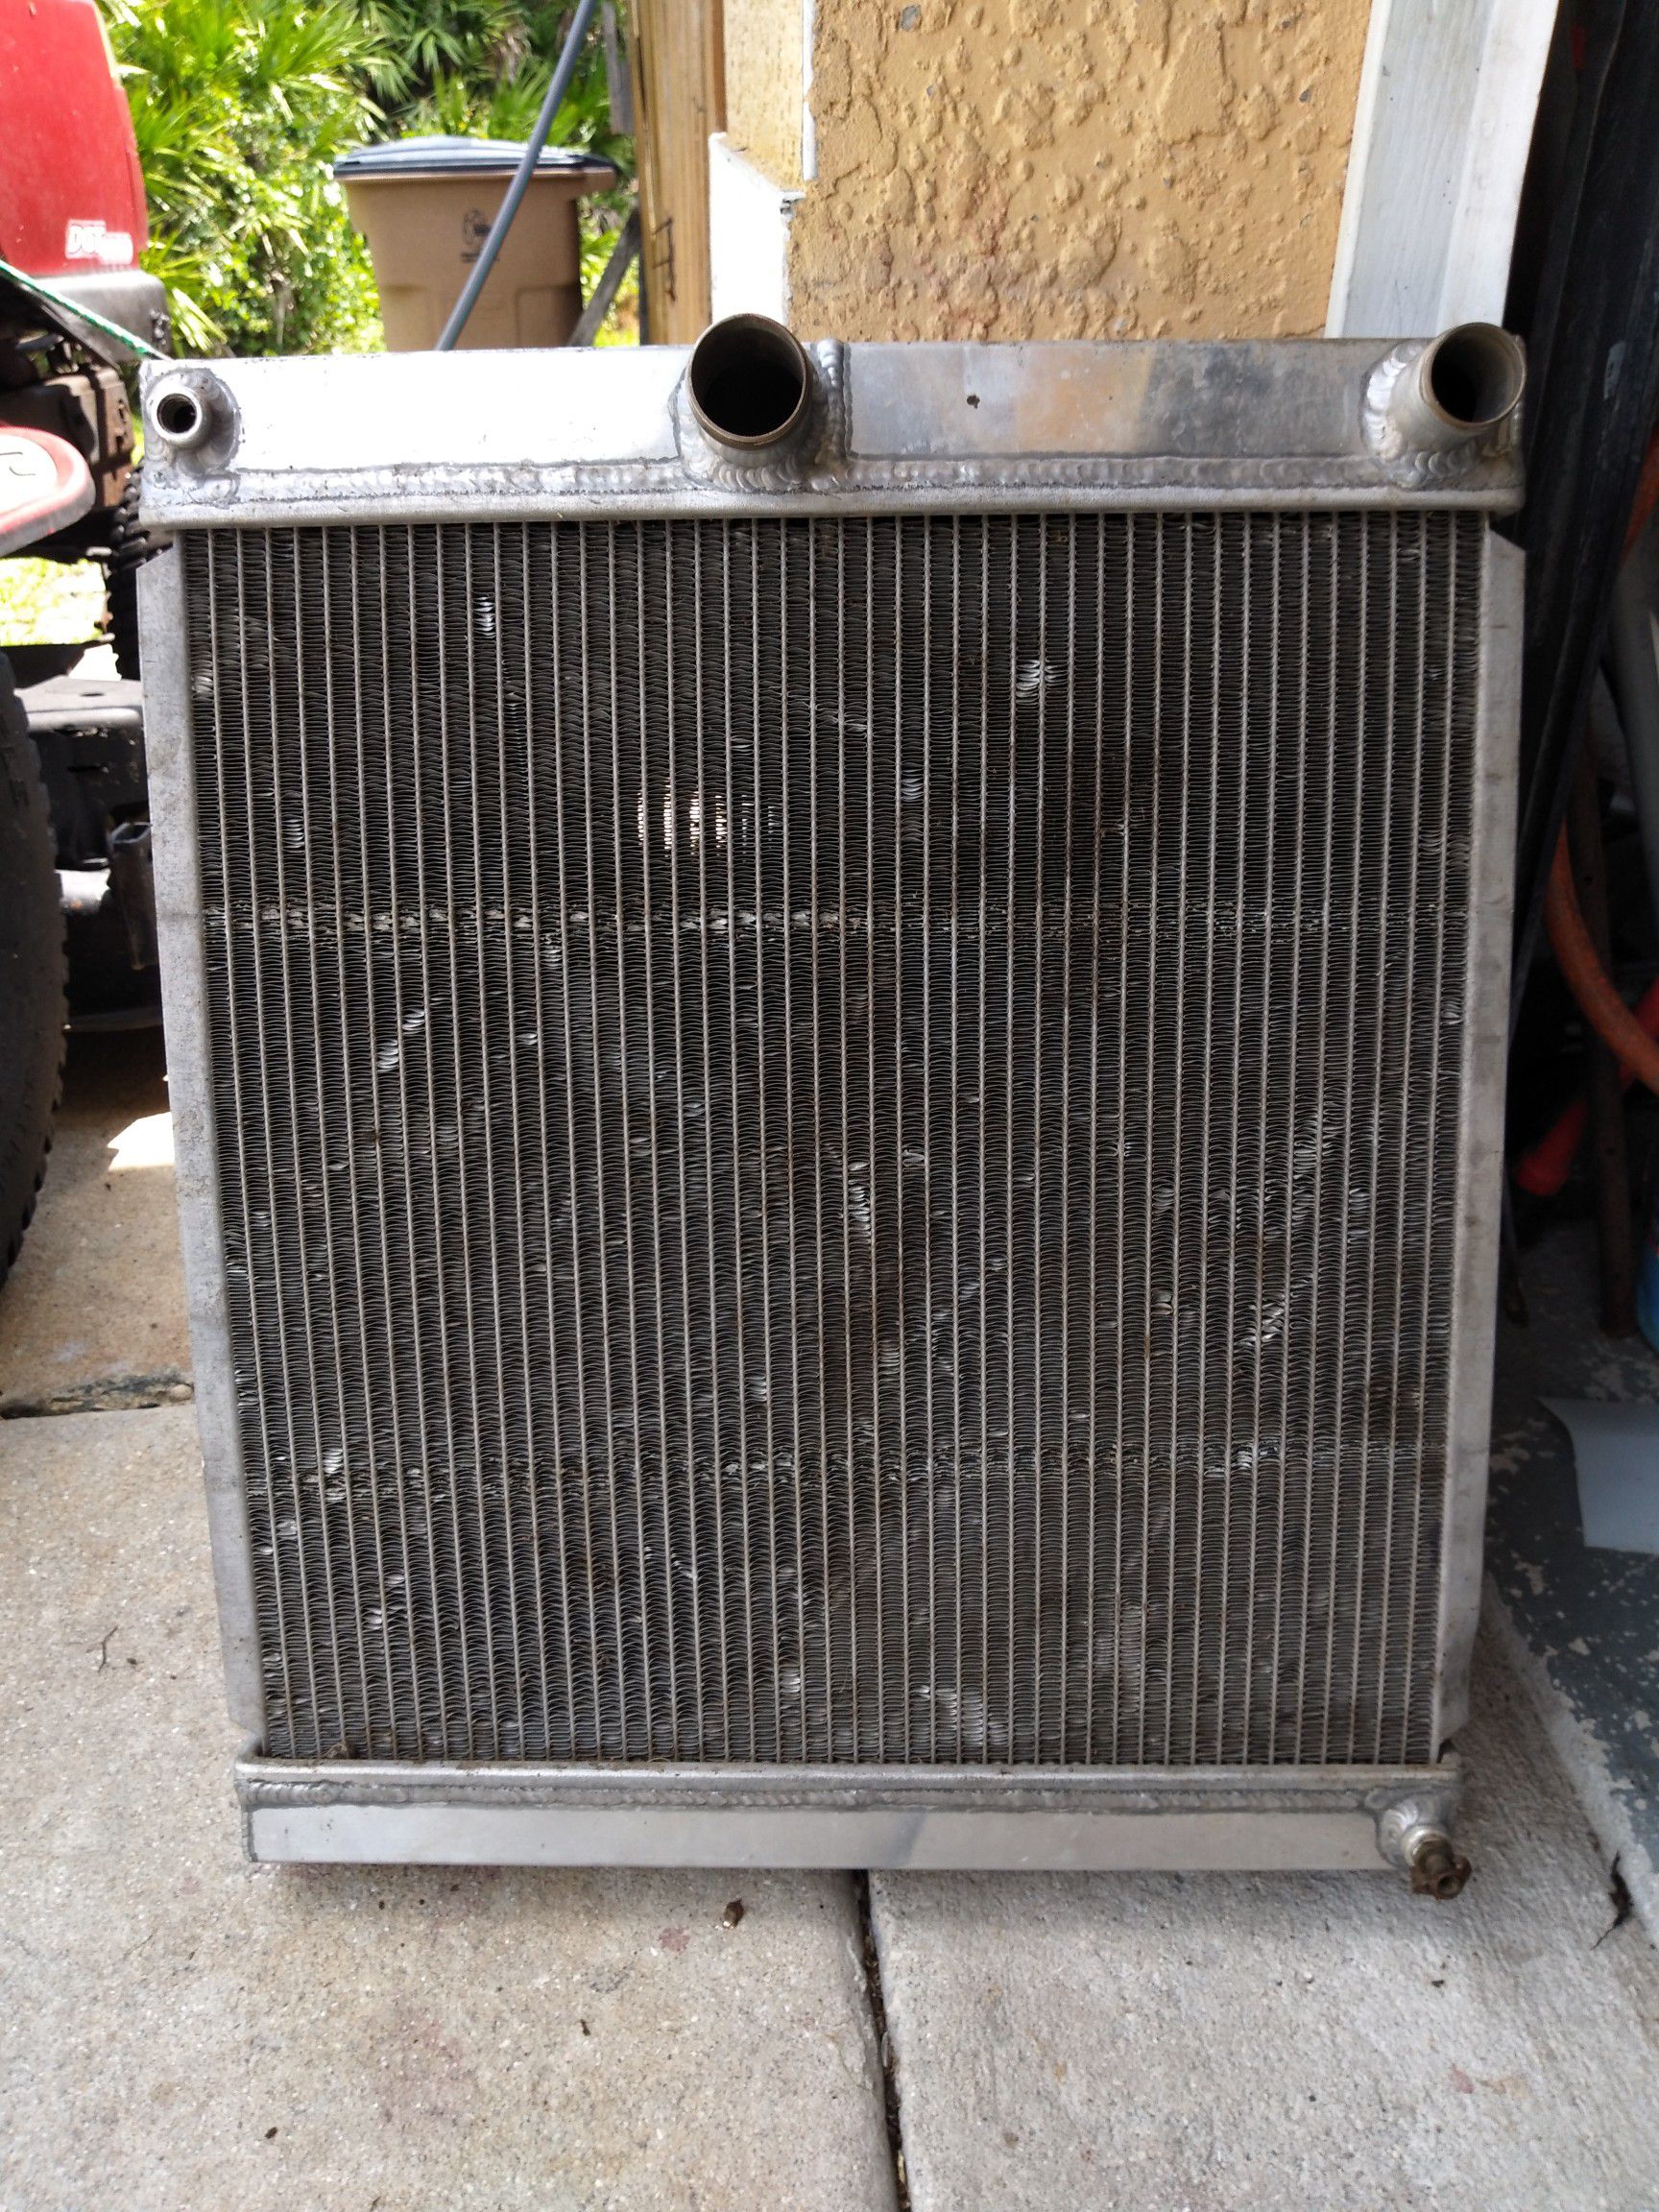 ALL ALUMINUM RACING RADIATOR. 4 CORE FROM SUMMIT RACING. 19in. Wide BY 22in. High. WORKS PERFECTLY